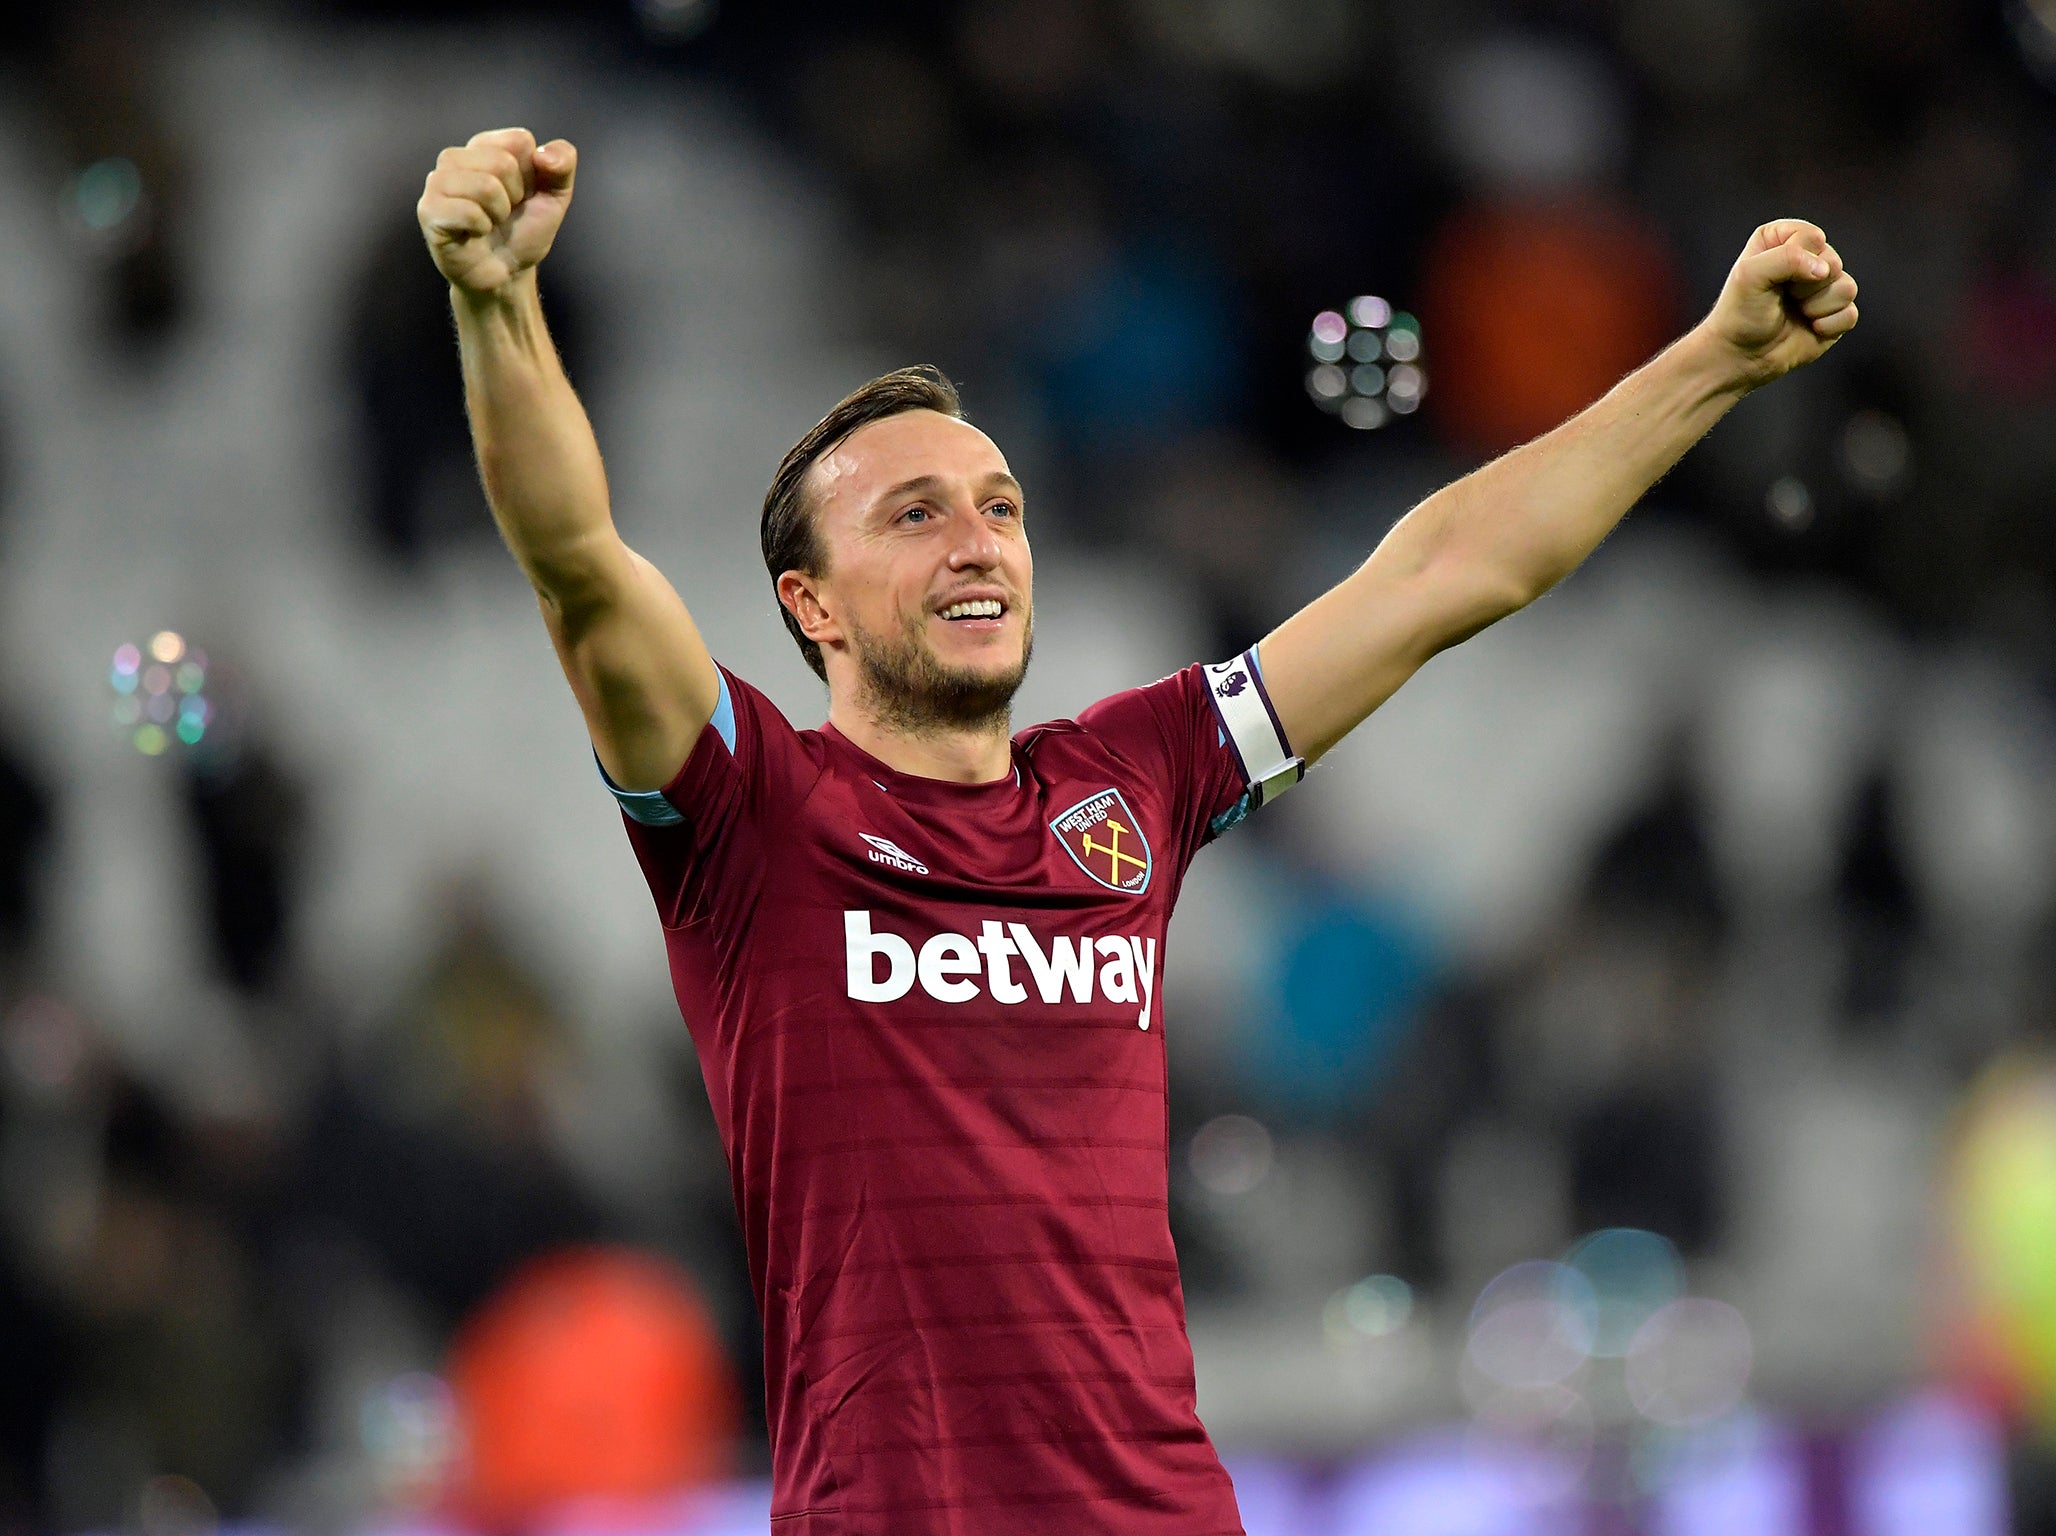 Mark Noble has signed a contract extension